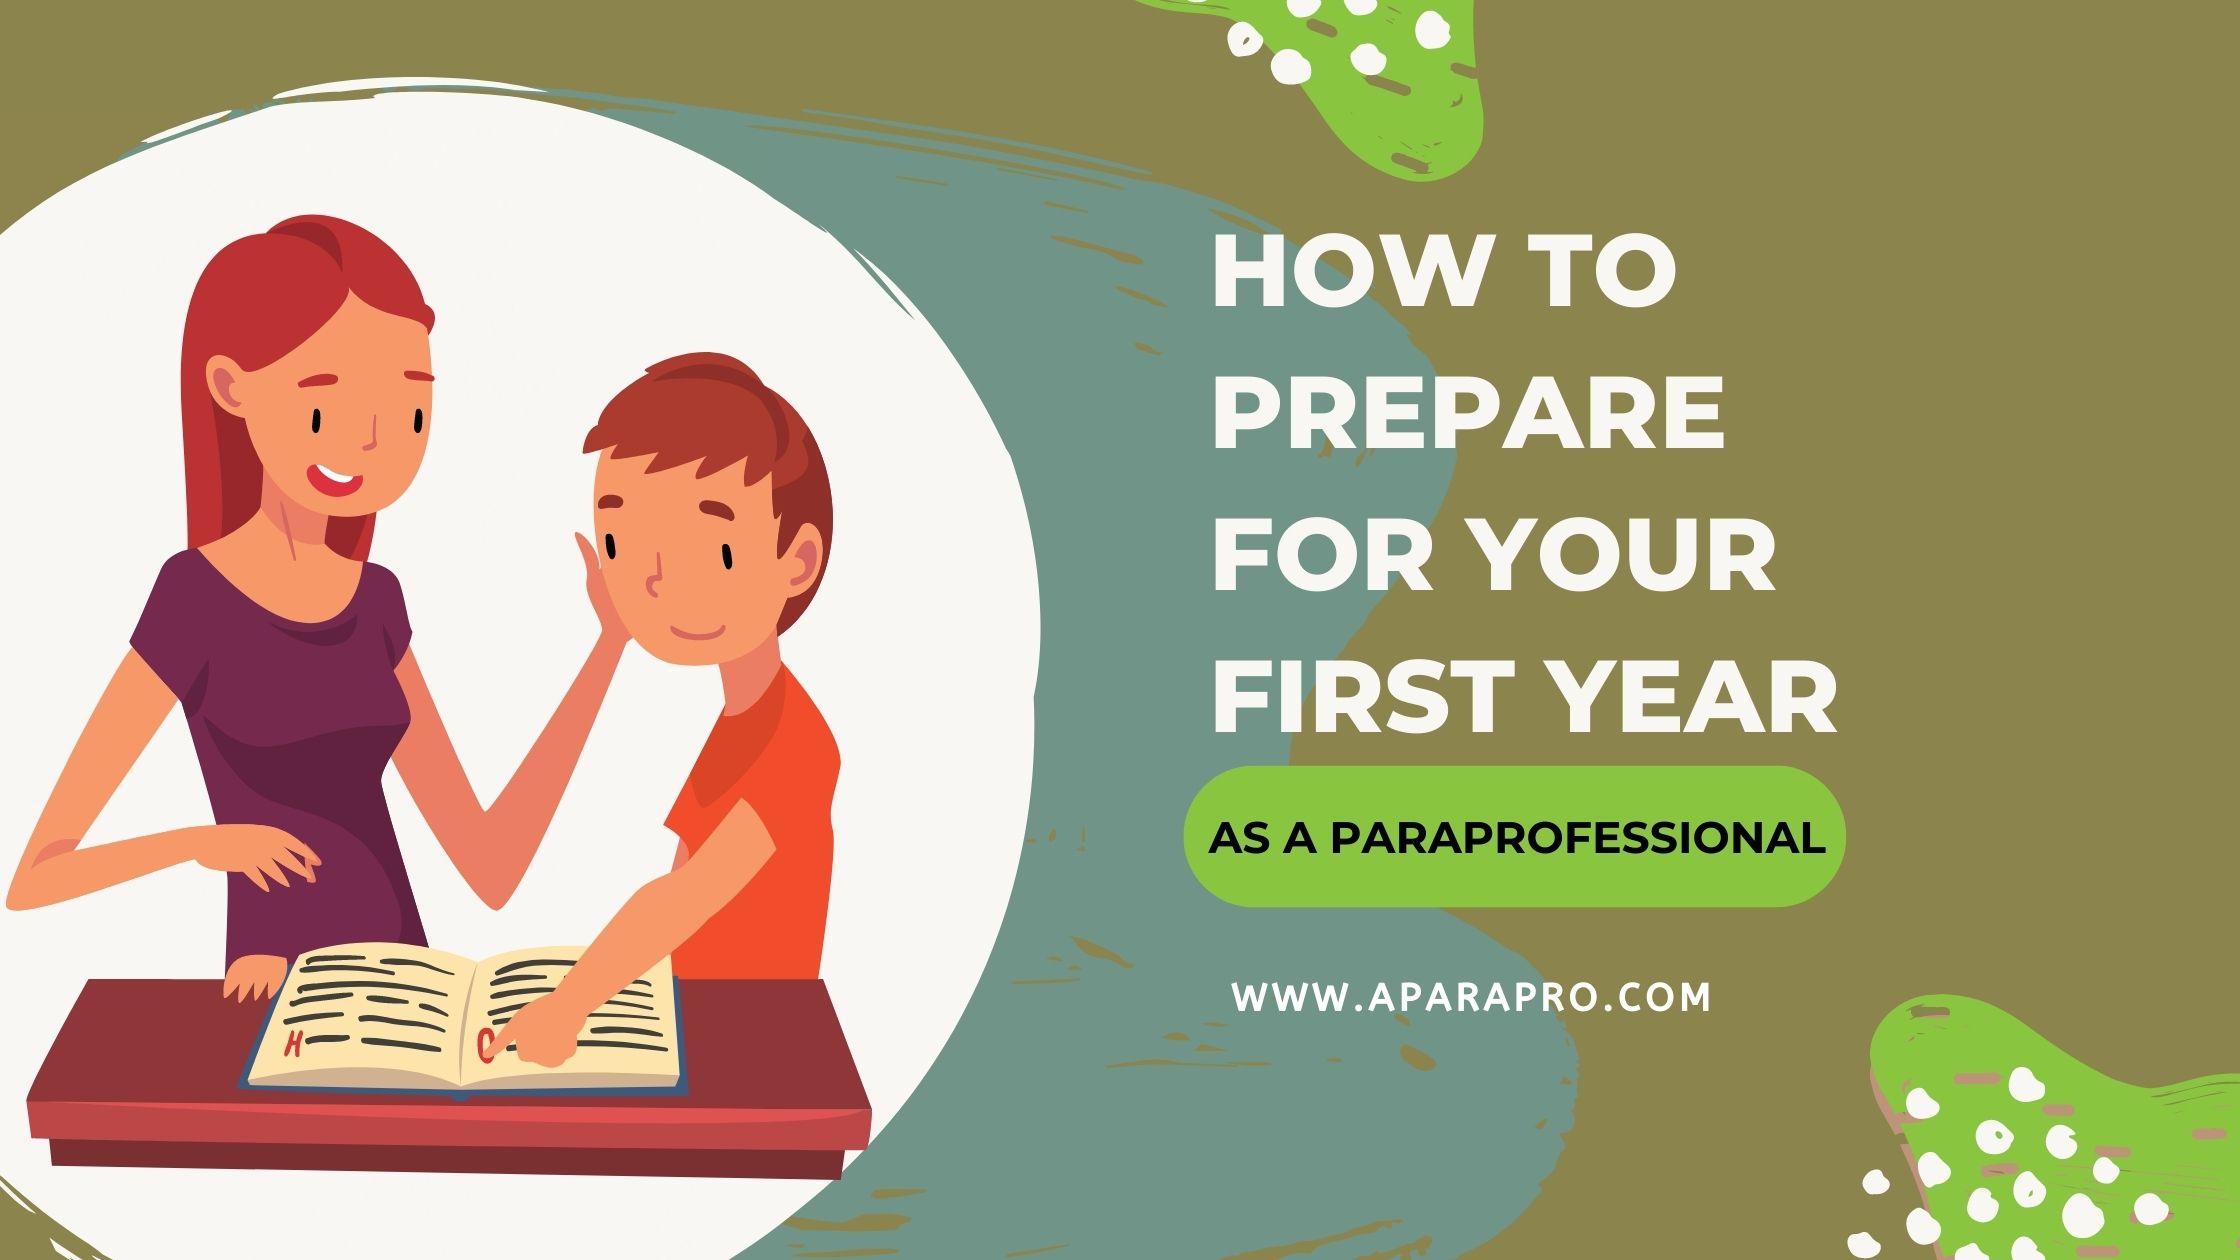 how to prepare for your first year as a paraprofessional by a para pro